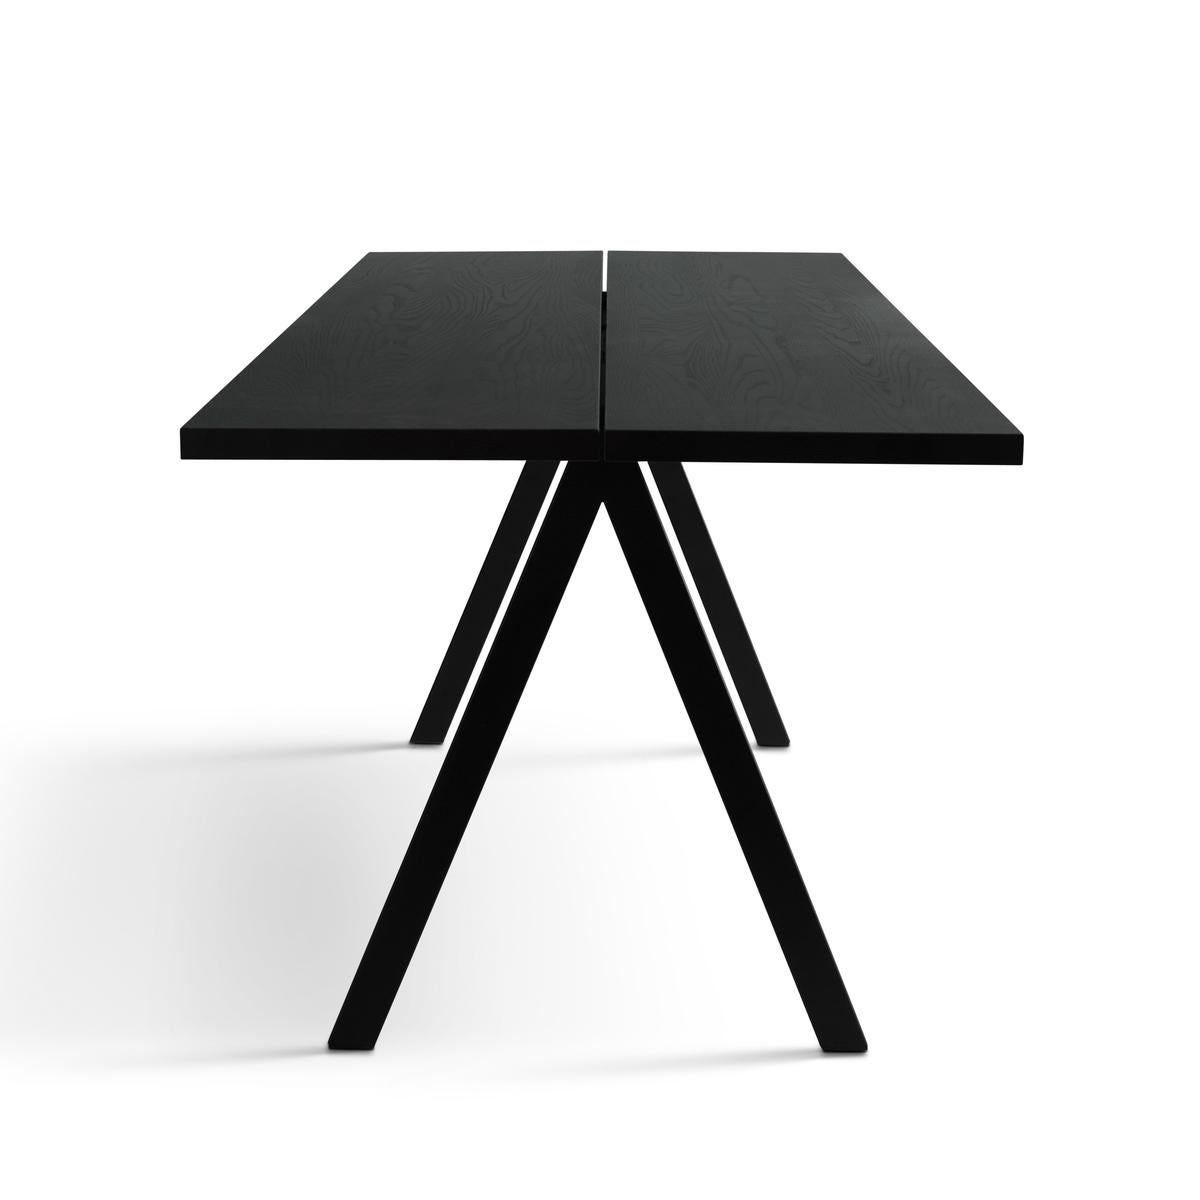 SAW dining table by Friends&Founders
Rectangular
Wood: solid ash, stained satin finish. Frame in powder coated metal.

Several sizes available: 
200 x 80 cm
250 x 95 cm 
300 x 100 cm
340 x 110 cm

Customizable. 

--
Contemporary design